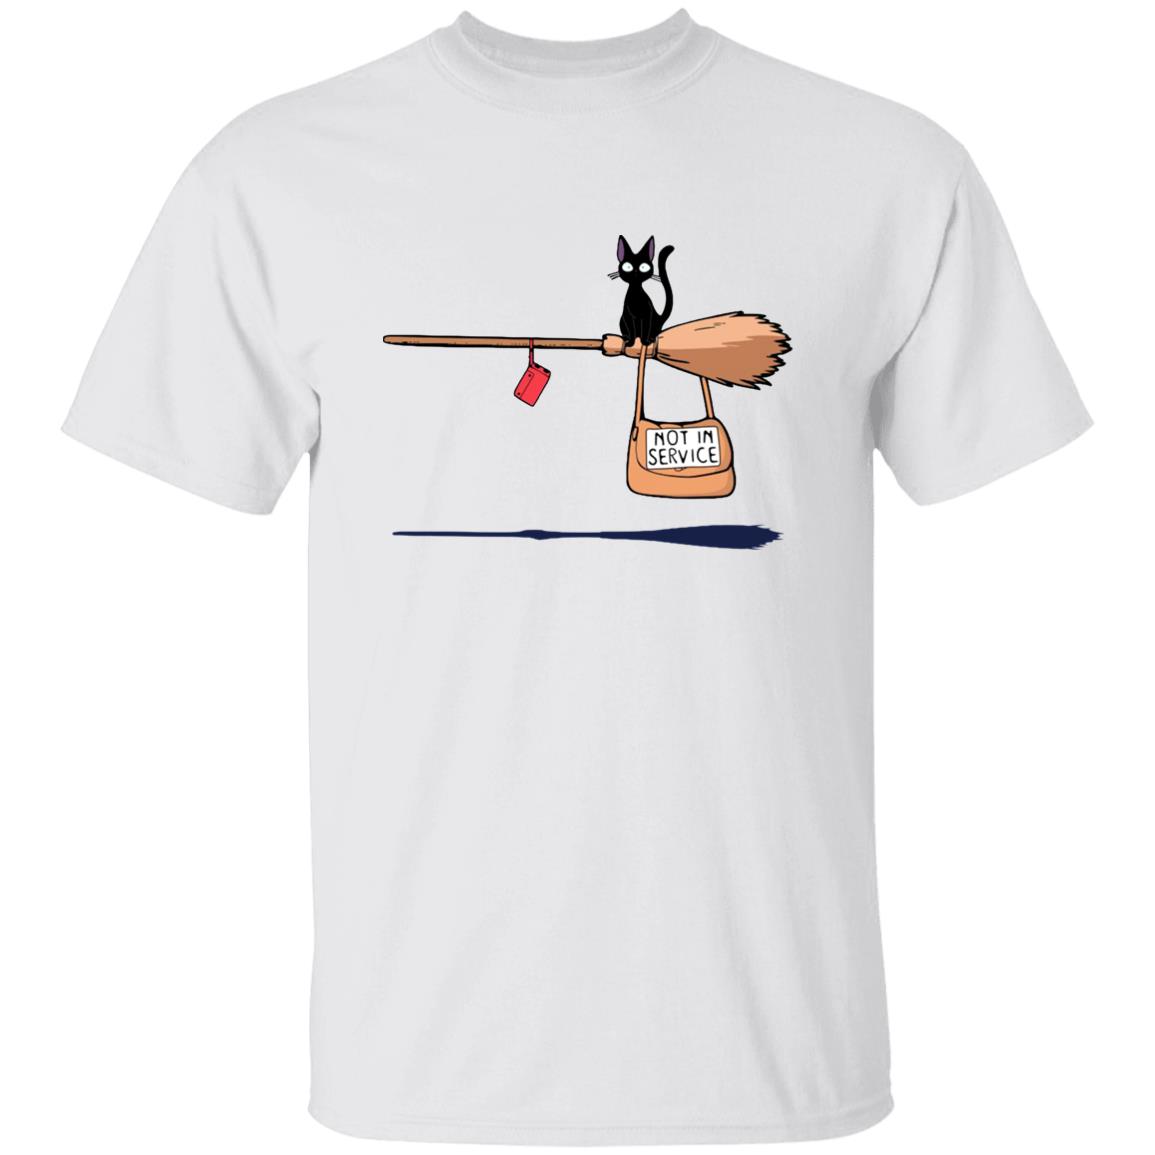 Kiki’s Delivery Service – Not in Service T Shirt